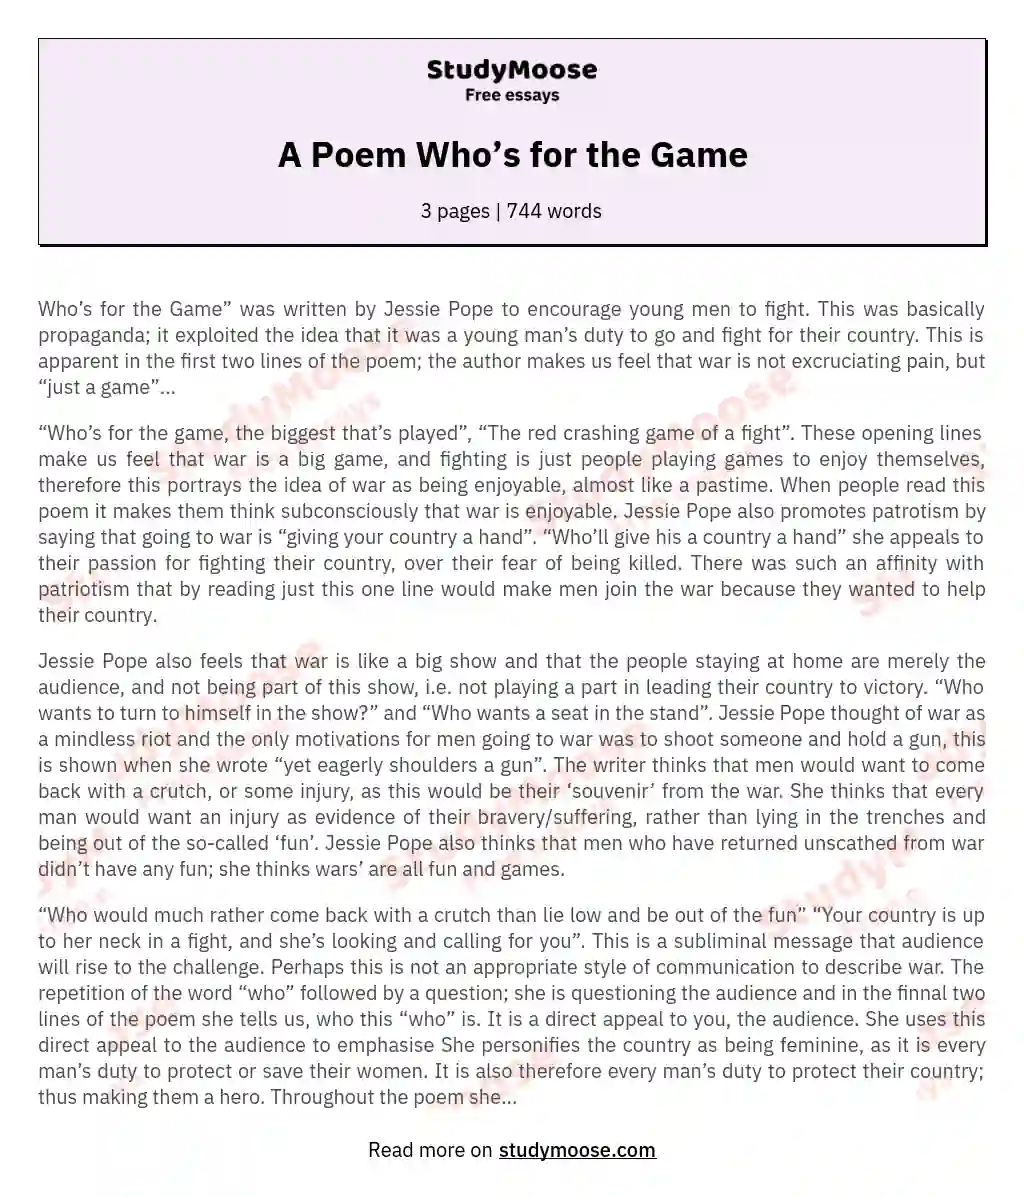 A Poem Who’s for the Game essay